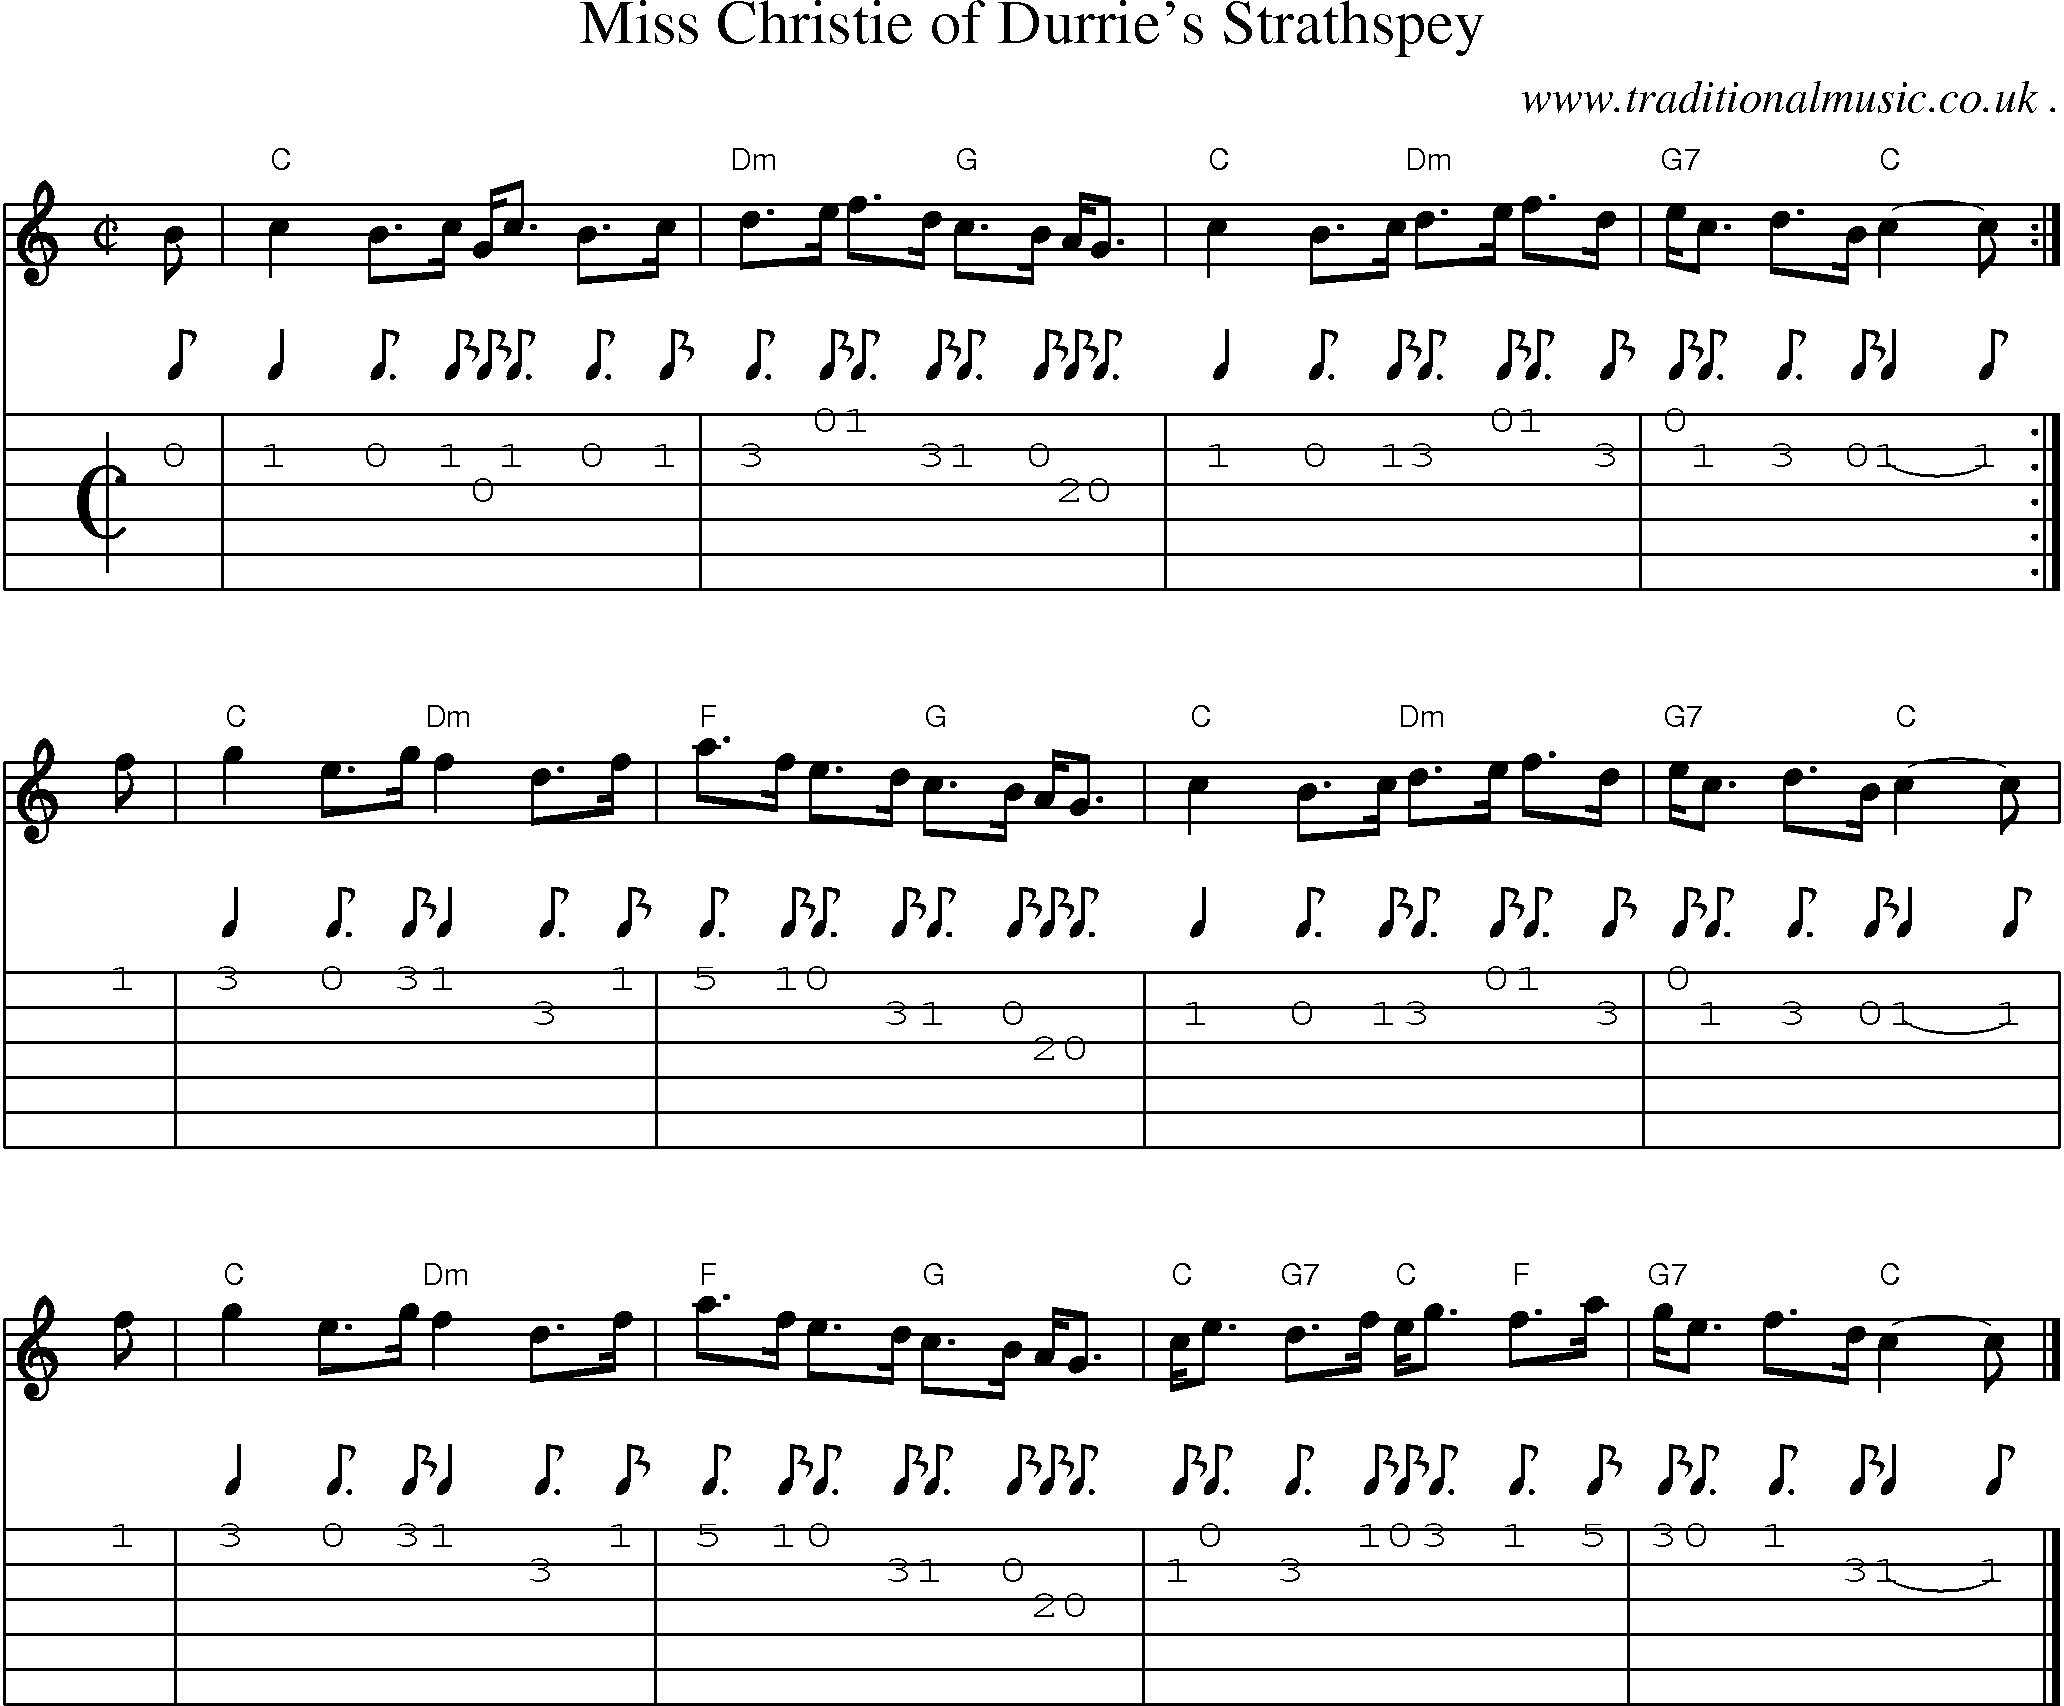 Sheet-music  score, Chords and Guitar Tabs for Miss Christie Of Durries Strathspey